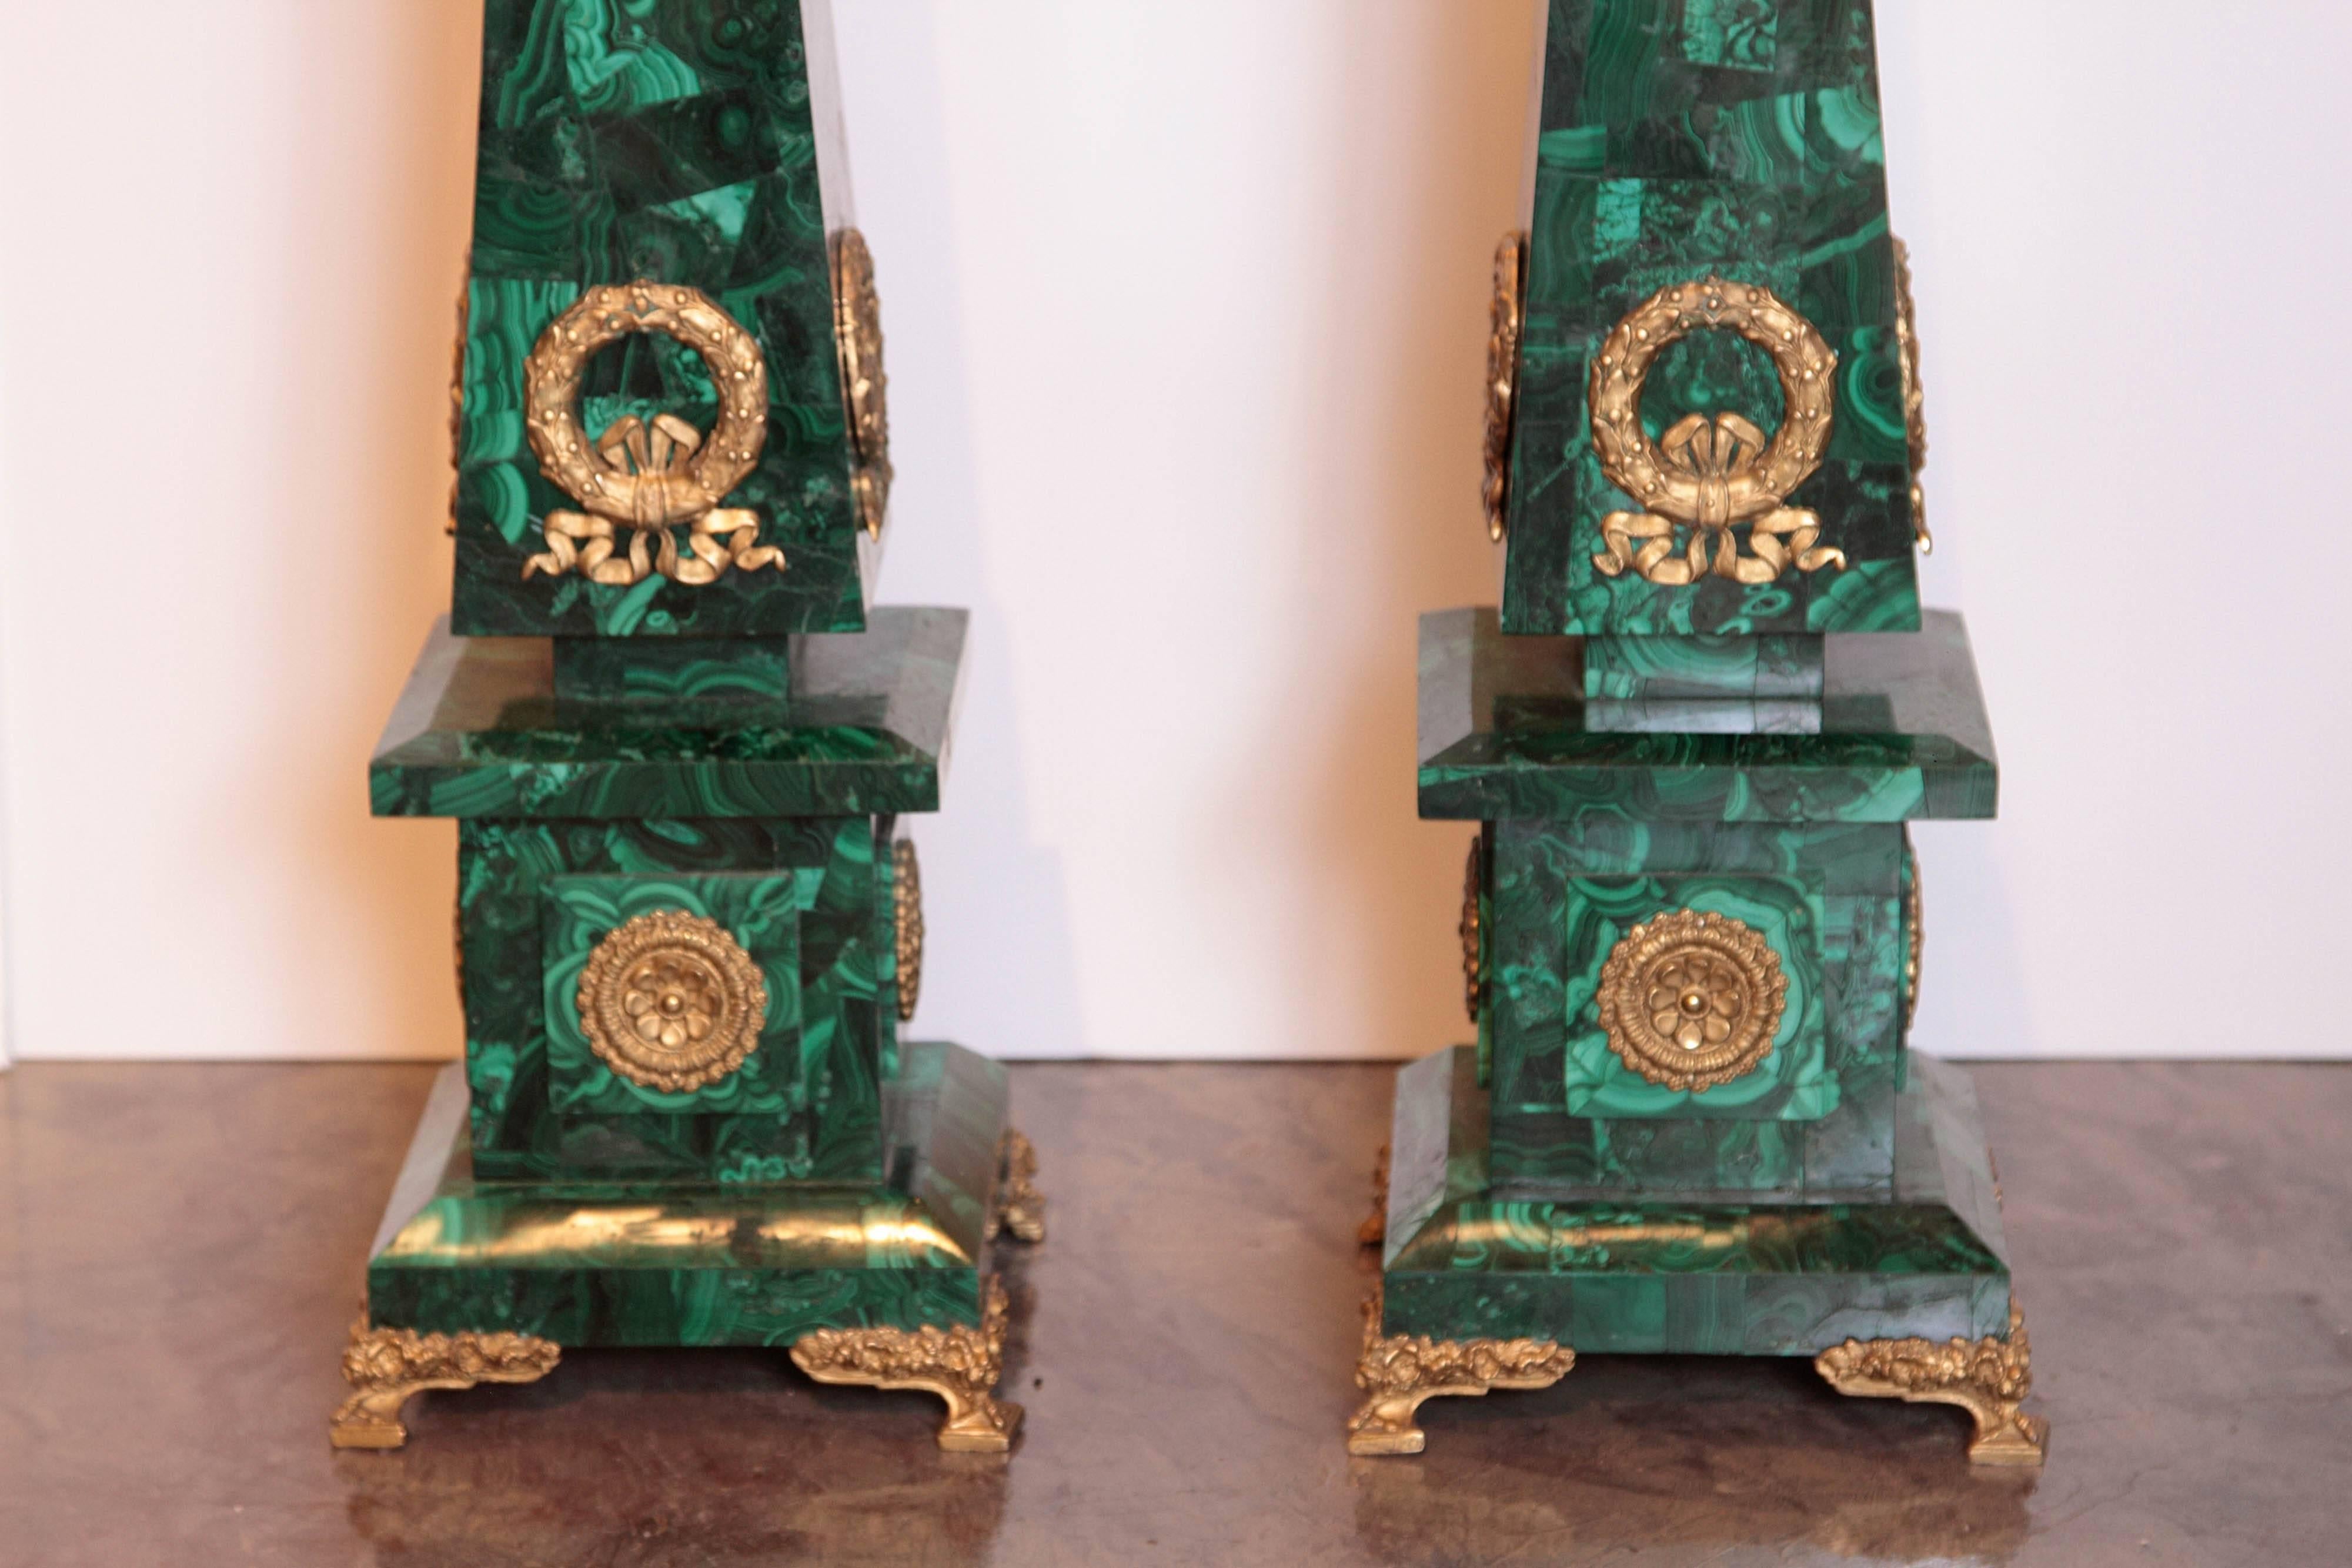 A fine pair of French Empire gilt bronze and malachite obelisks. Signed behind the bronzes P.E. Guerin. Excellent condition large size.